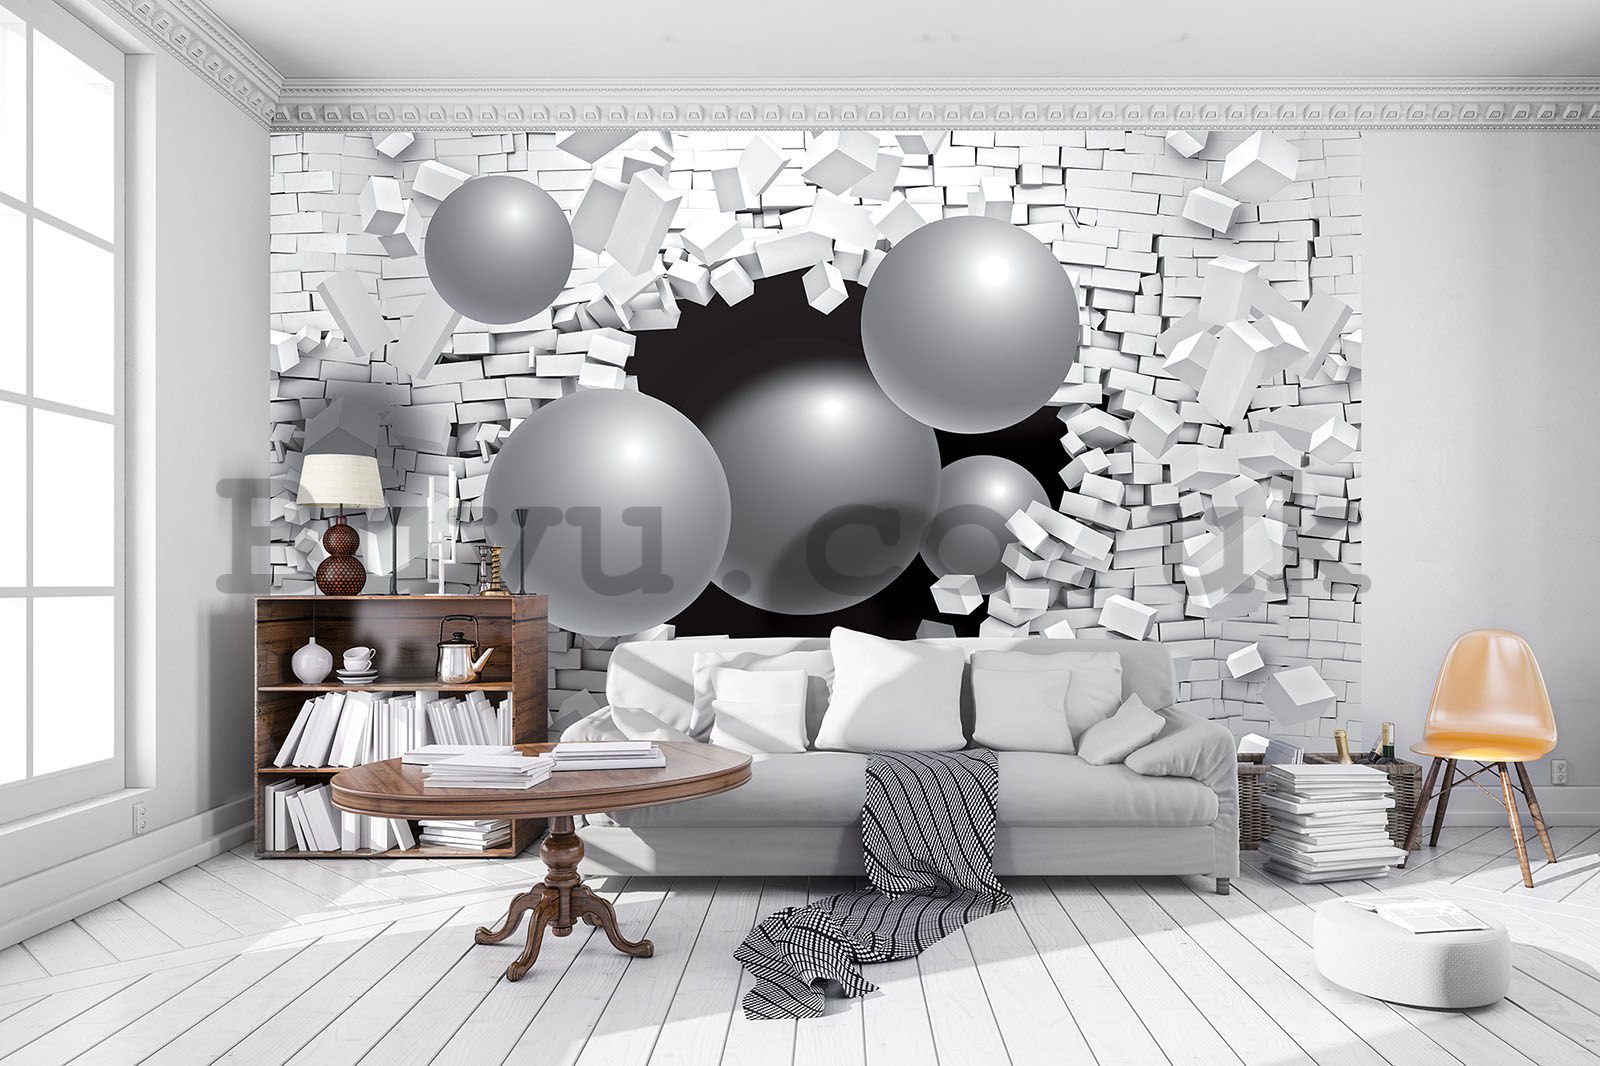 Wall mural: Spheres from a wall (1) - 254x184 cm